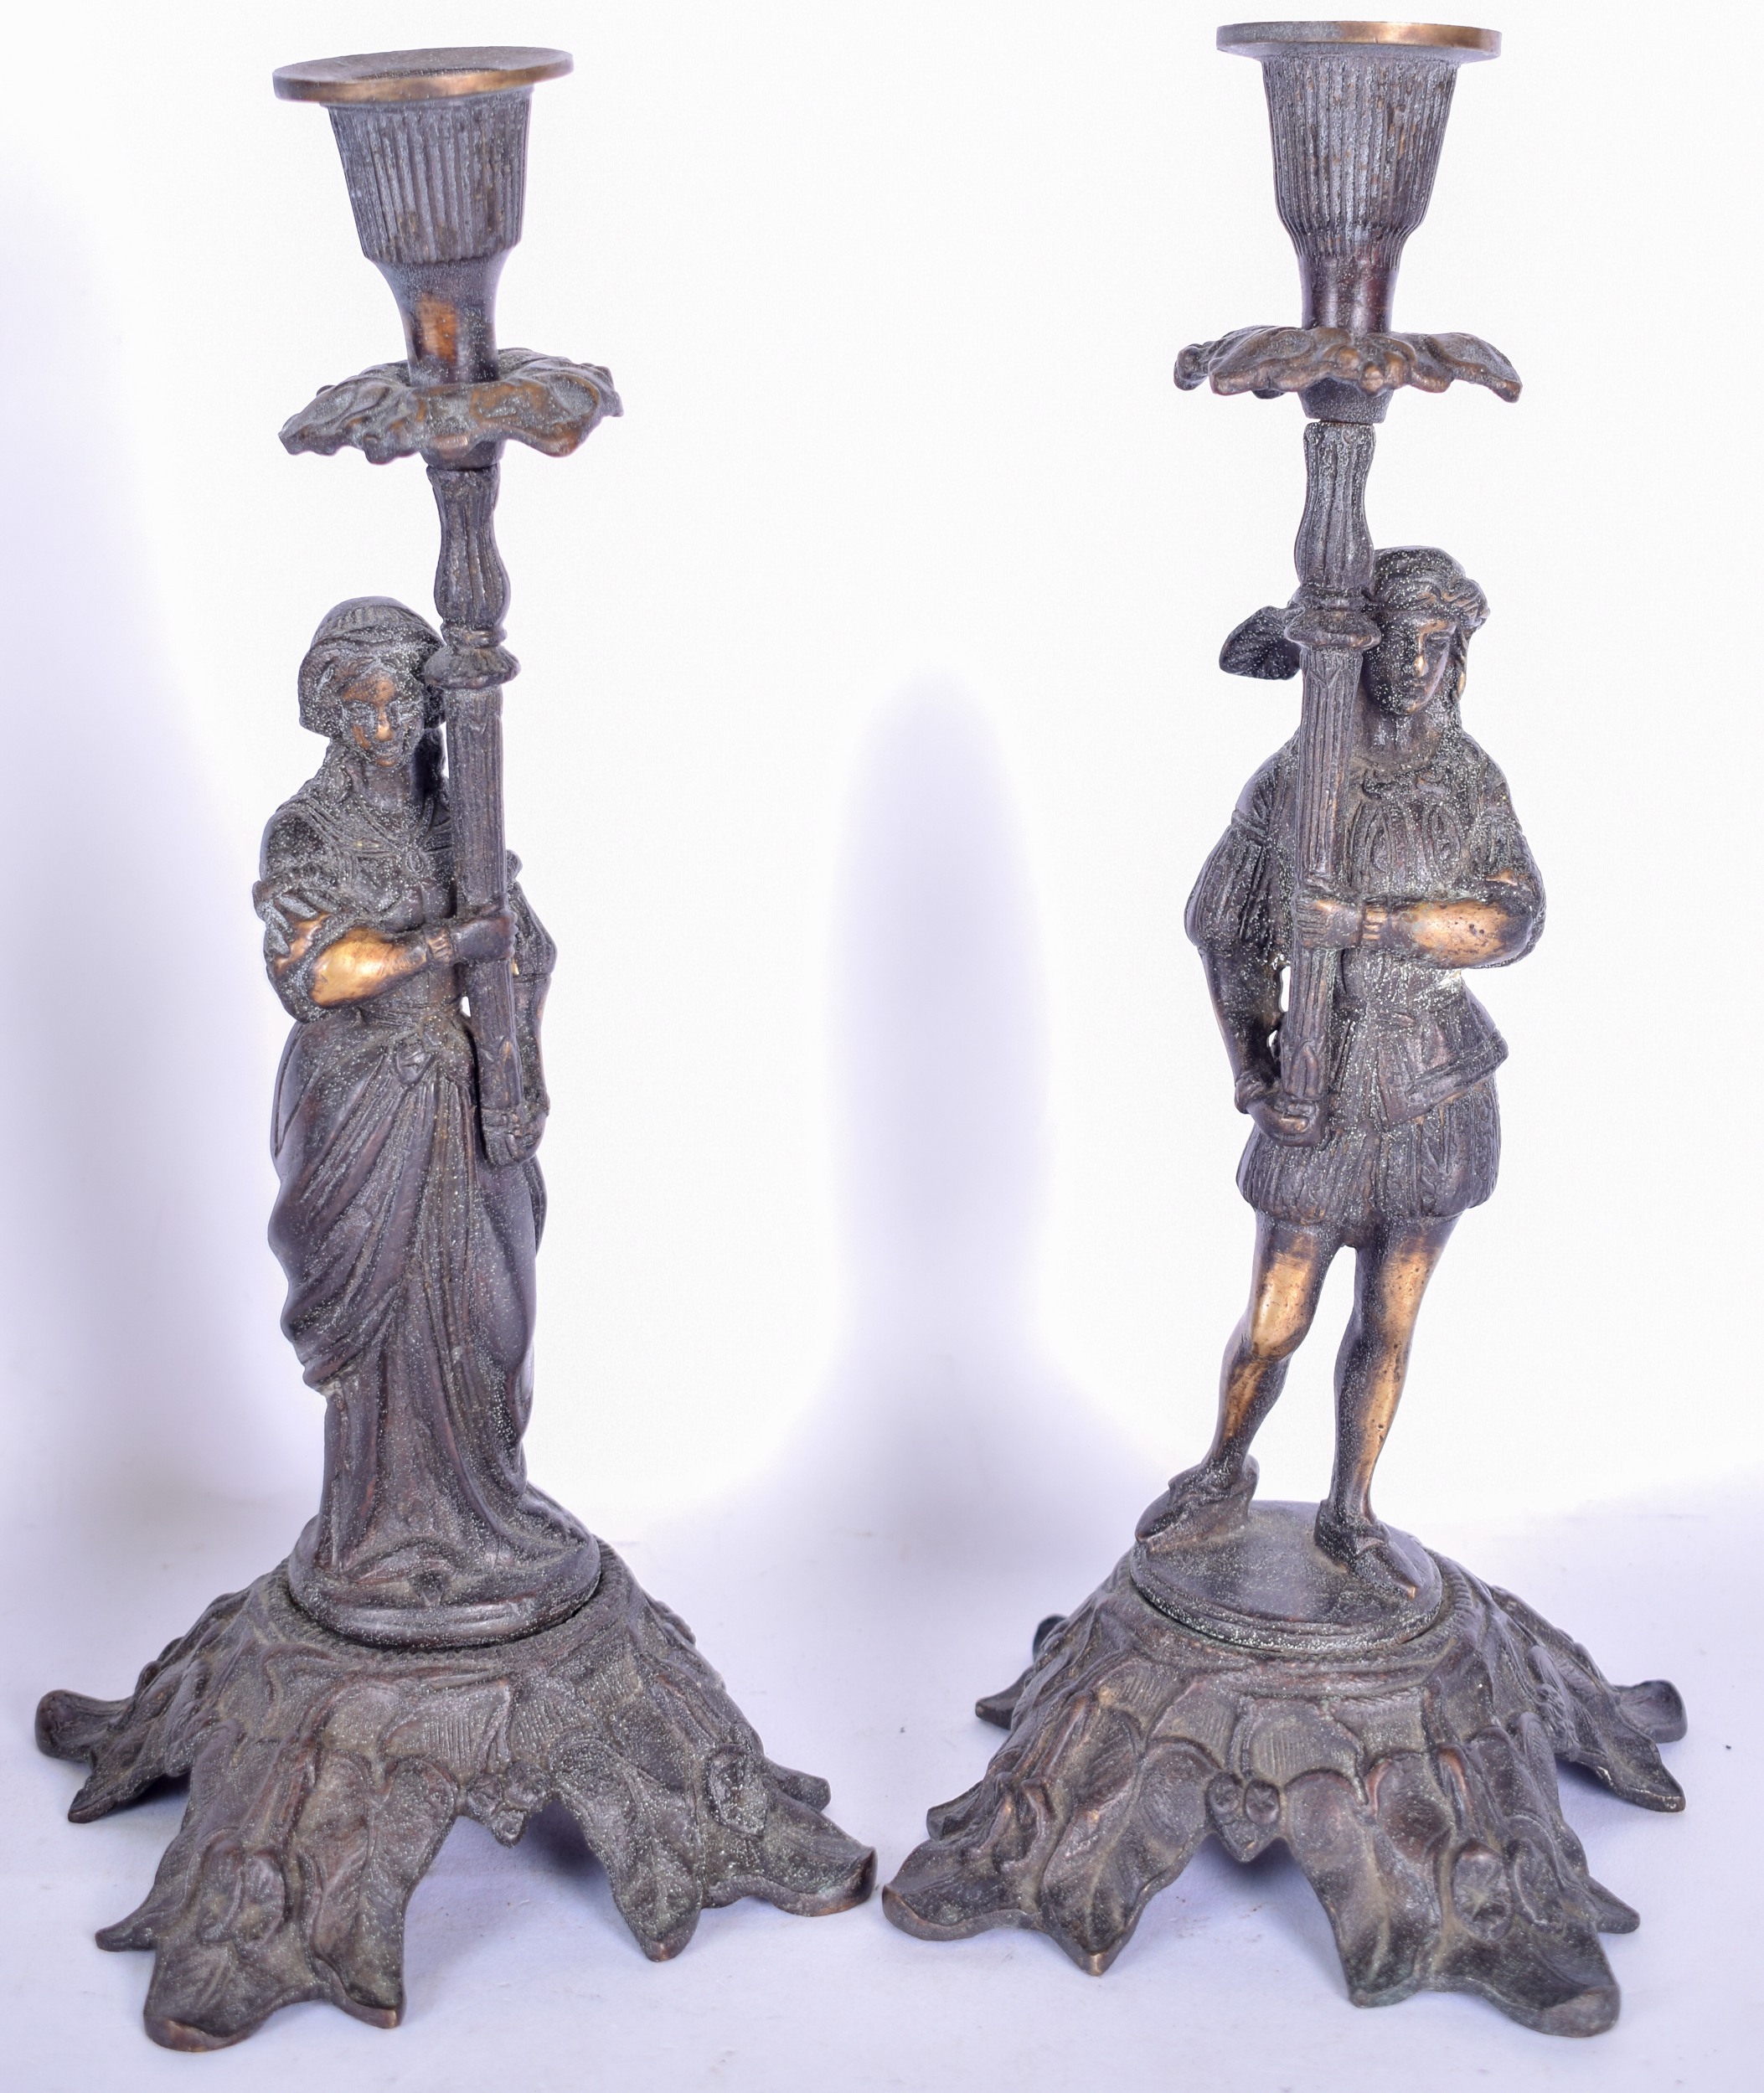 A PAIR OF EARLY 20TH CENTURY BRONZE CANDLESTICK HOLDERS, formed as a male and female. 28 cm high.